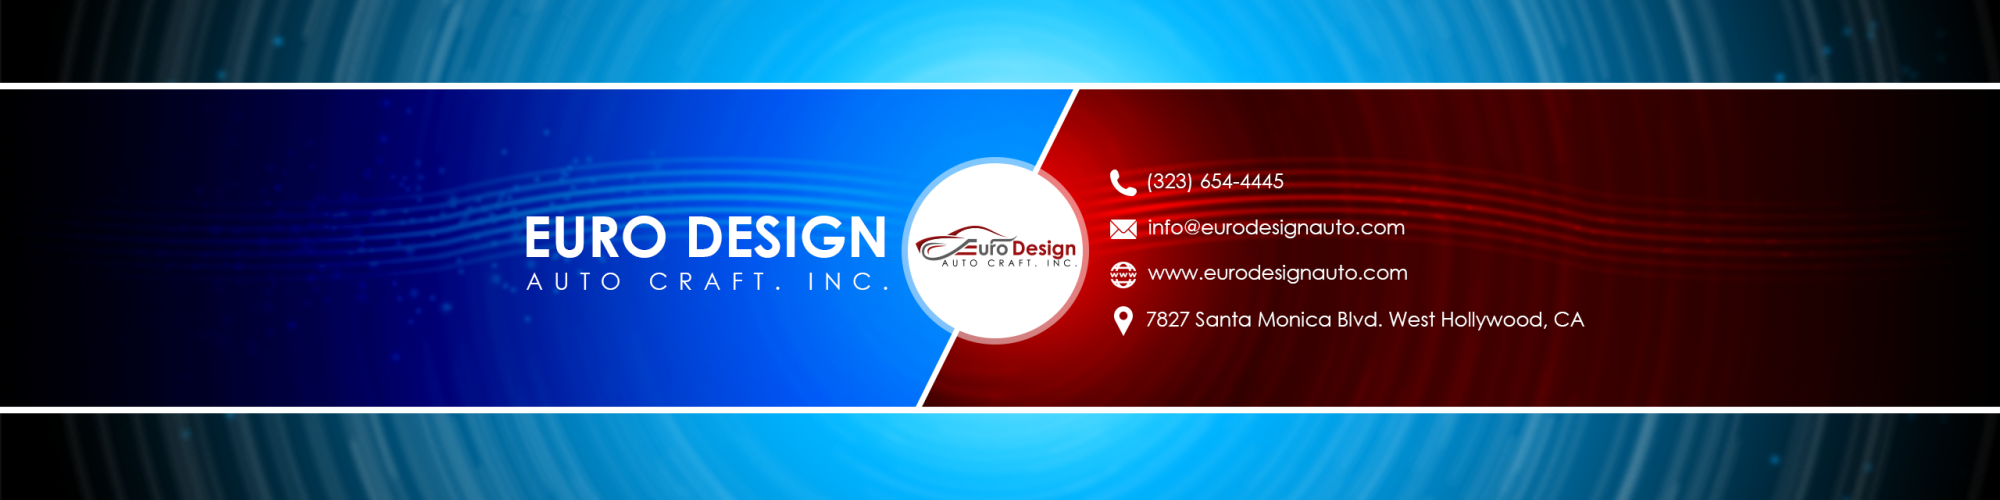 Euro Design Auto Craft - Best Auto Body Shop in West Hollywood & Beverly Hills, CA